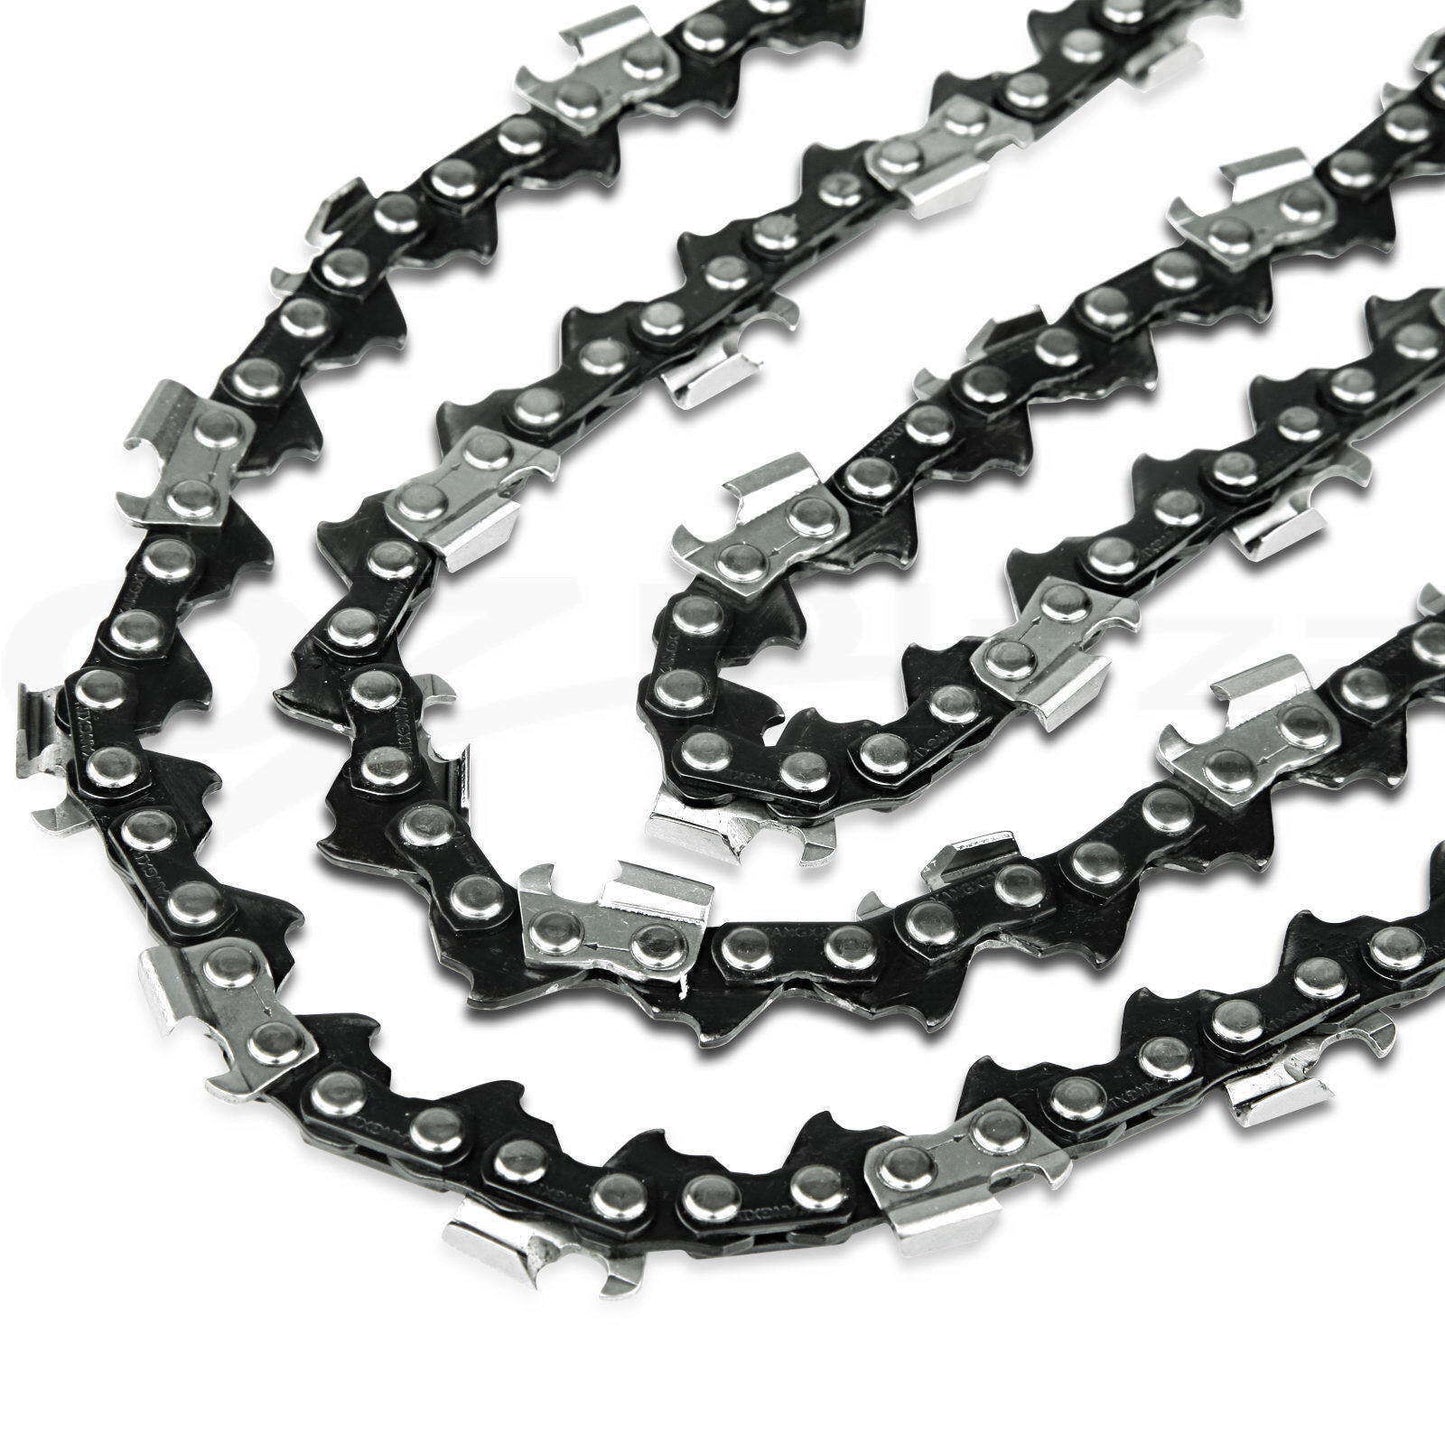 10XCHAINSAW CHAINS .325 063 68DL FOR STIHL 18" BAR MS250 MS251 MS230 MS231 025